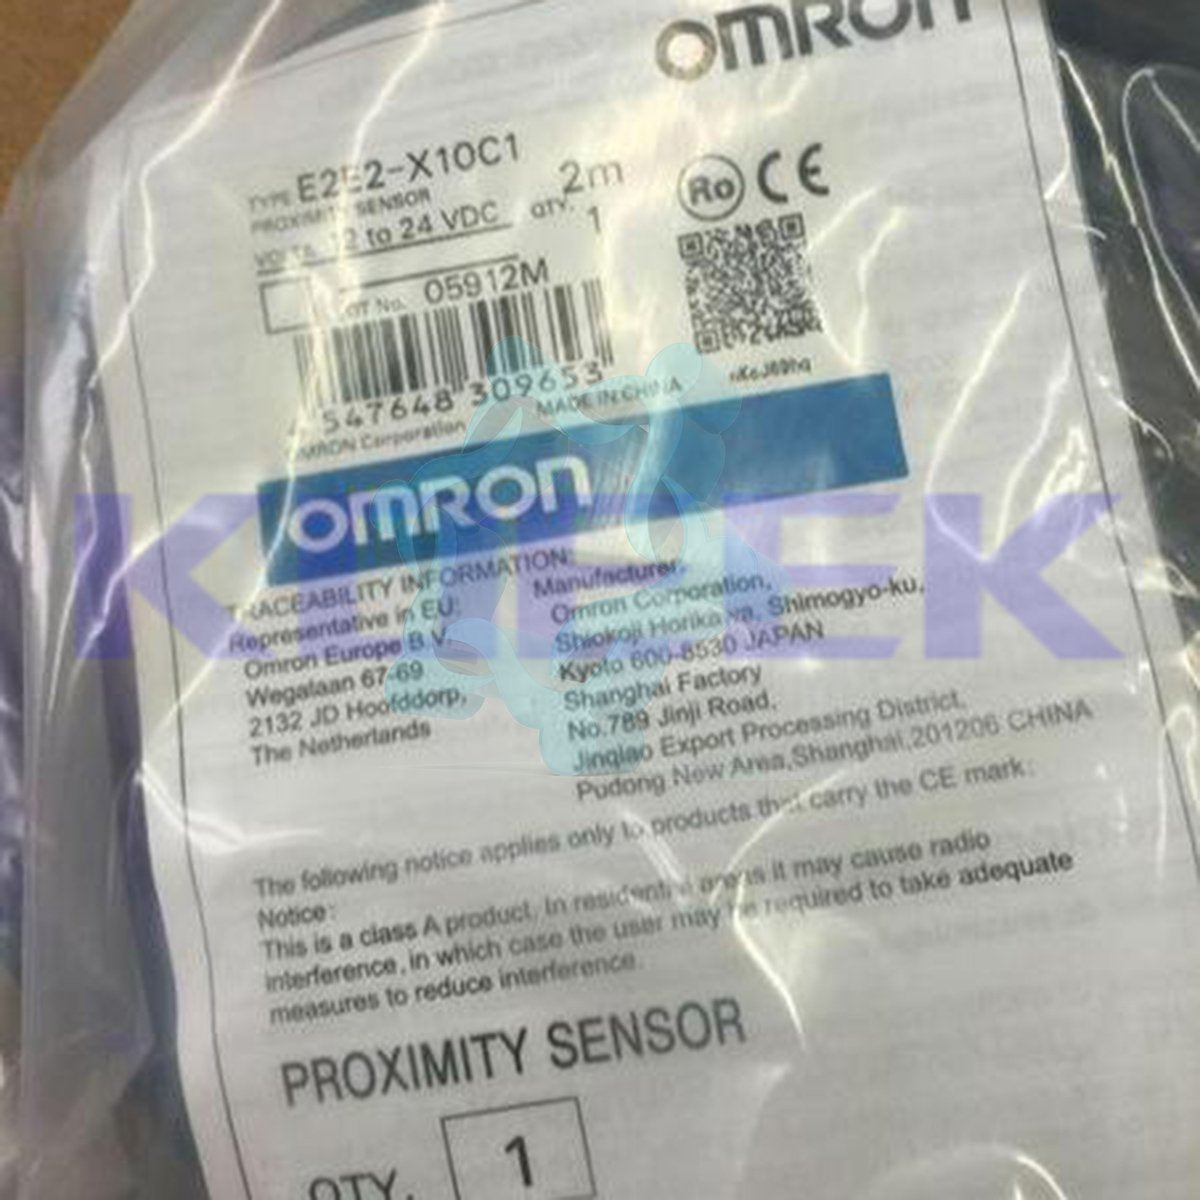 E2E2-X10C1 KOEED 101-200, 80%, import_2020_10_10_031751, Omron, Other